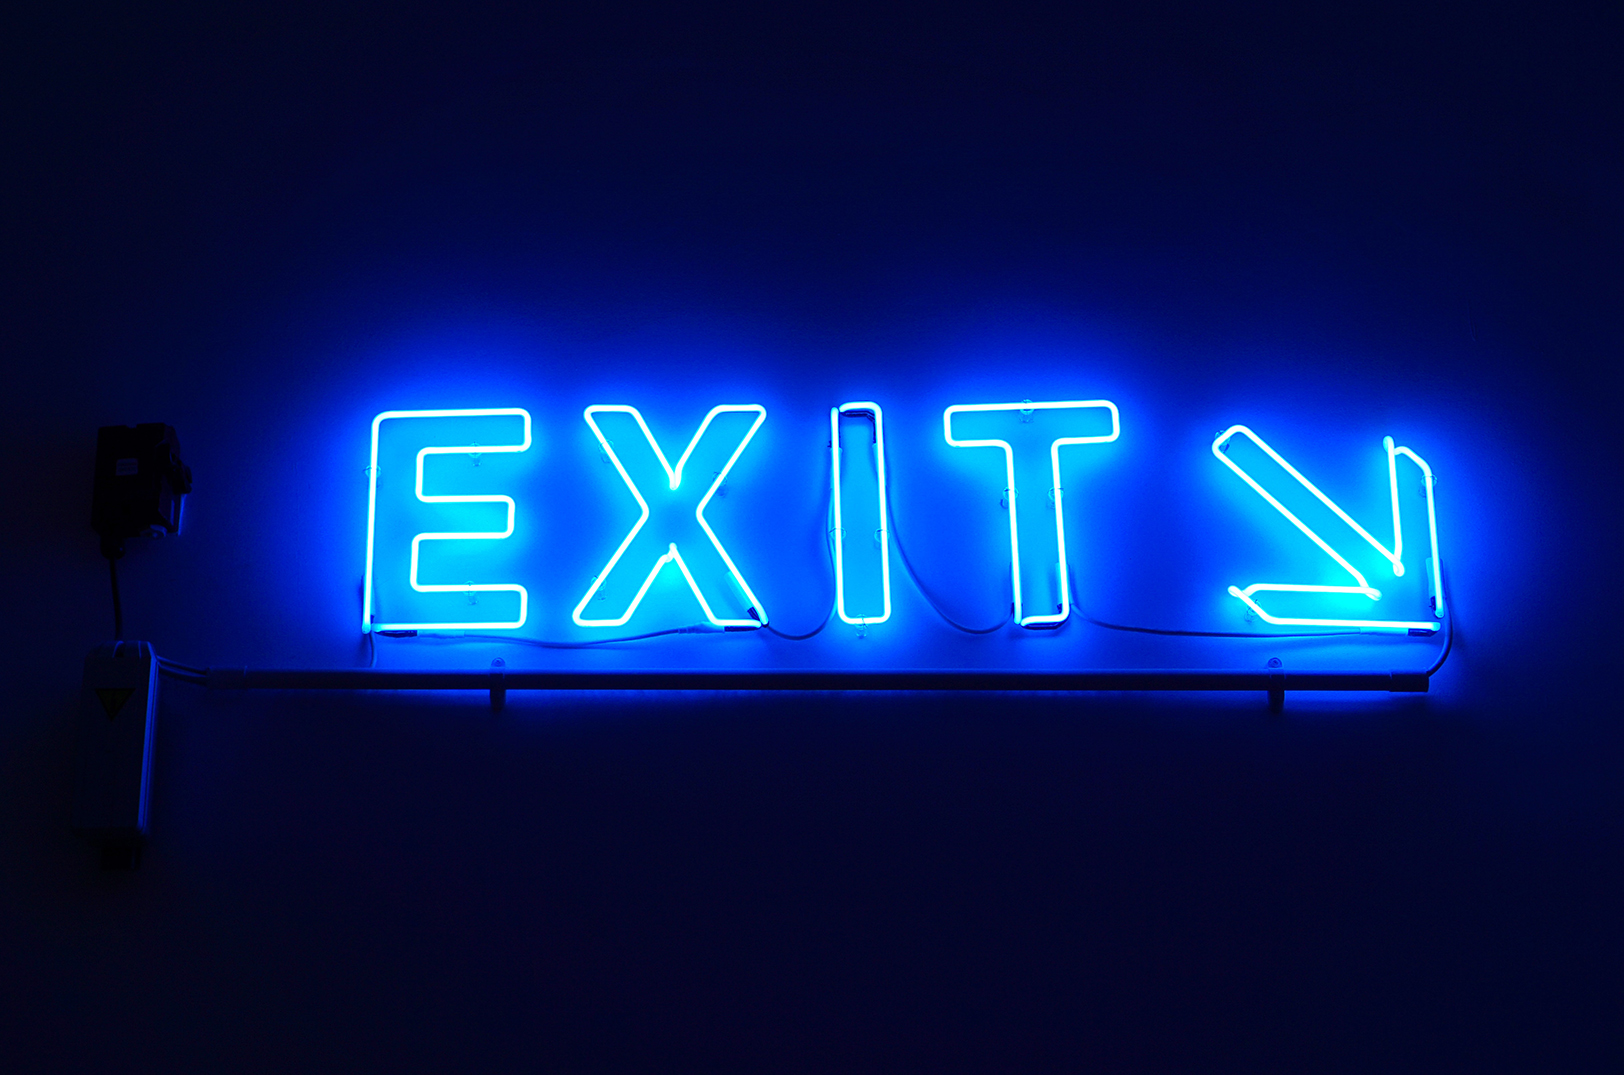 Earn-out exit: Beware a startup sale price hinging on future performance, attorney cautions